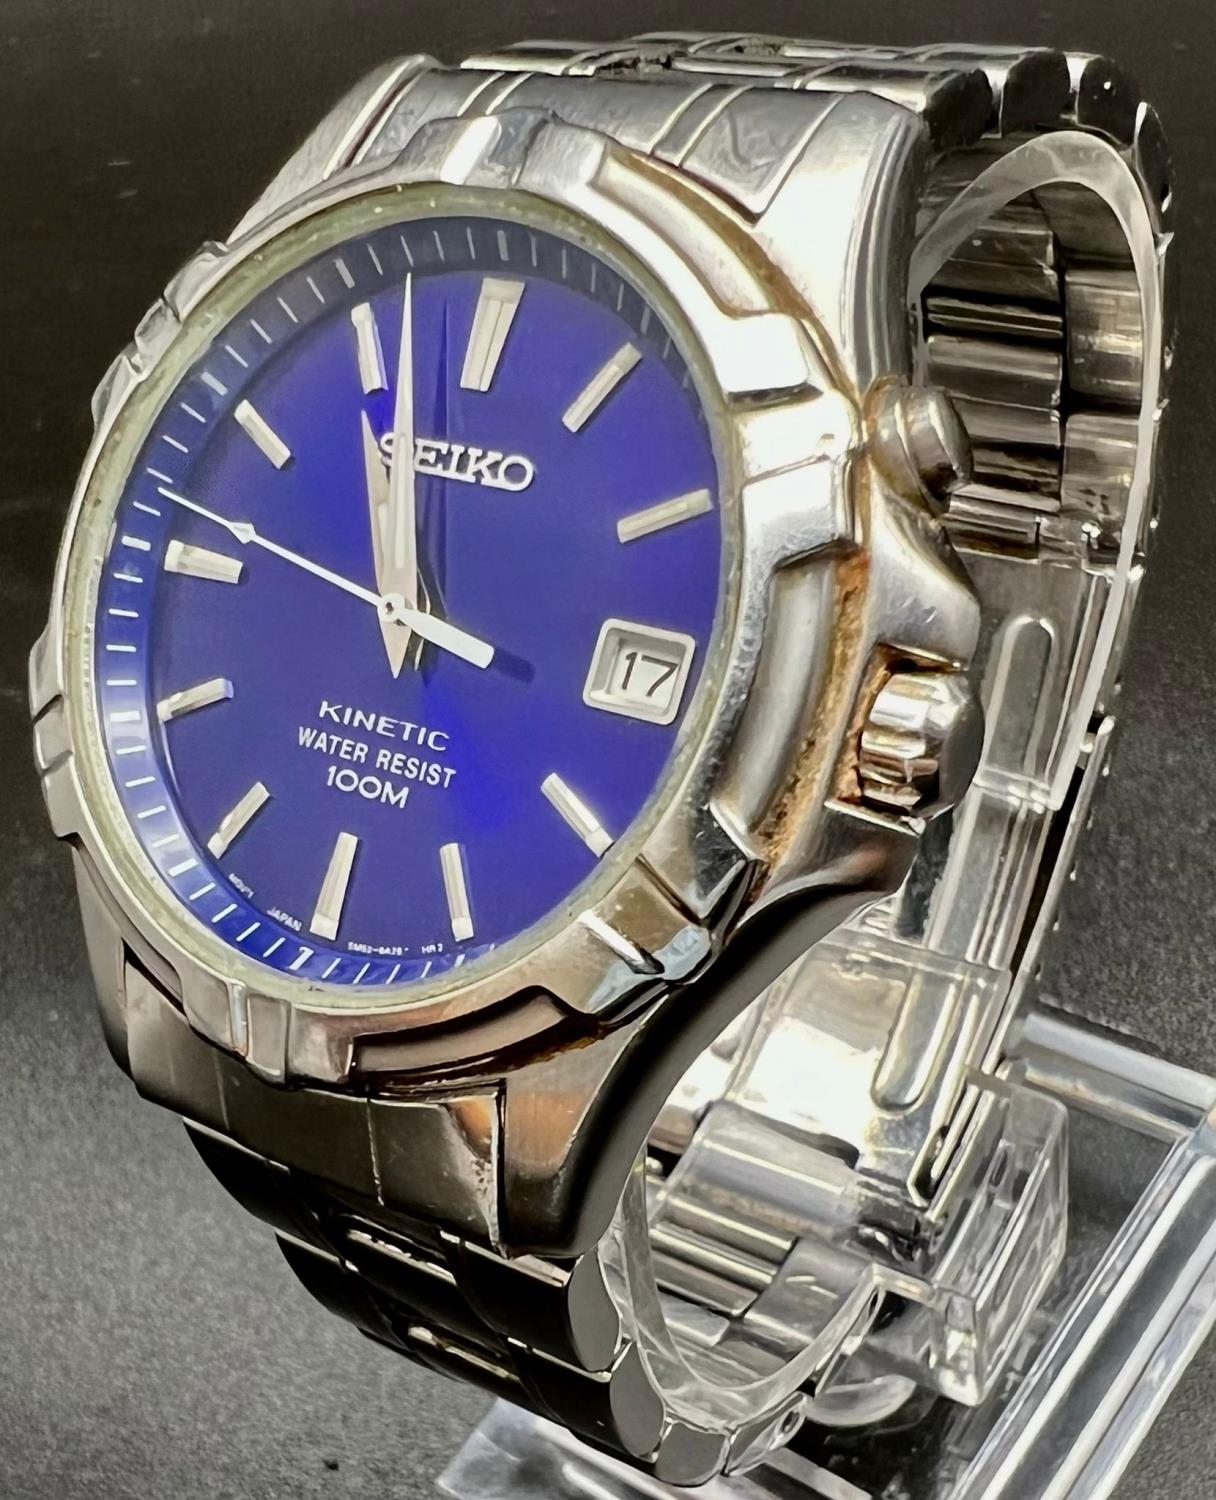 A Seiko Kinetic Gents Watch. Stainless steel strap and case - 35mm. Blue dial with date window. In